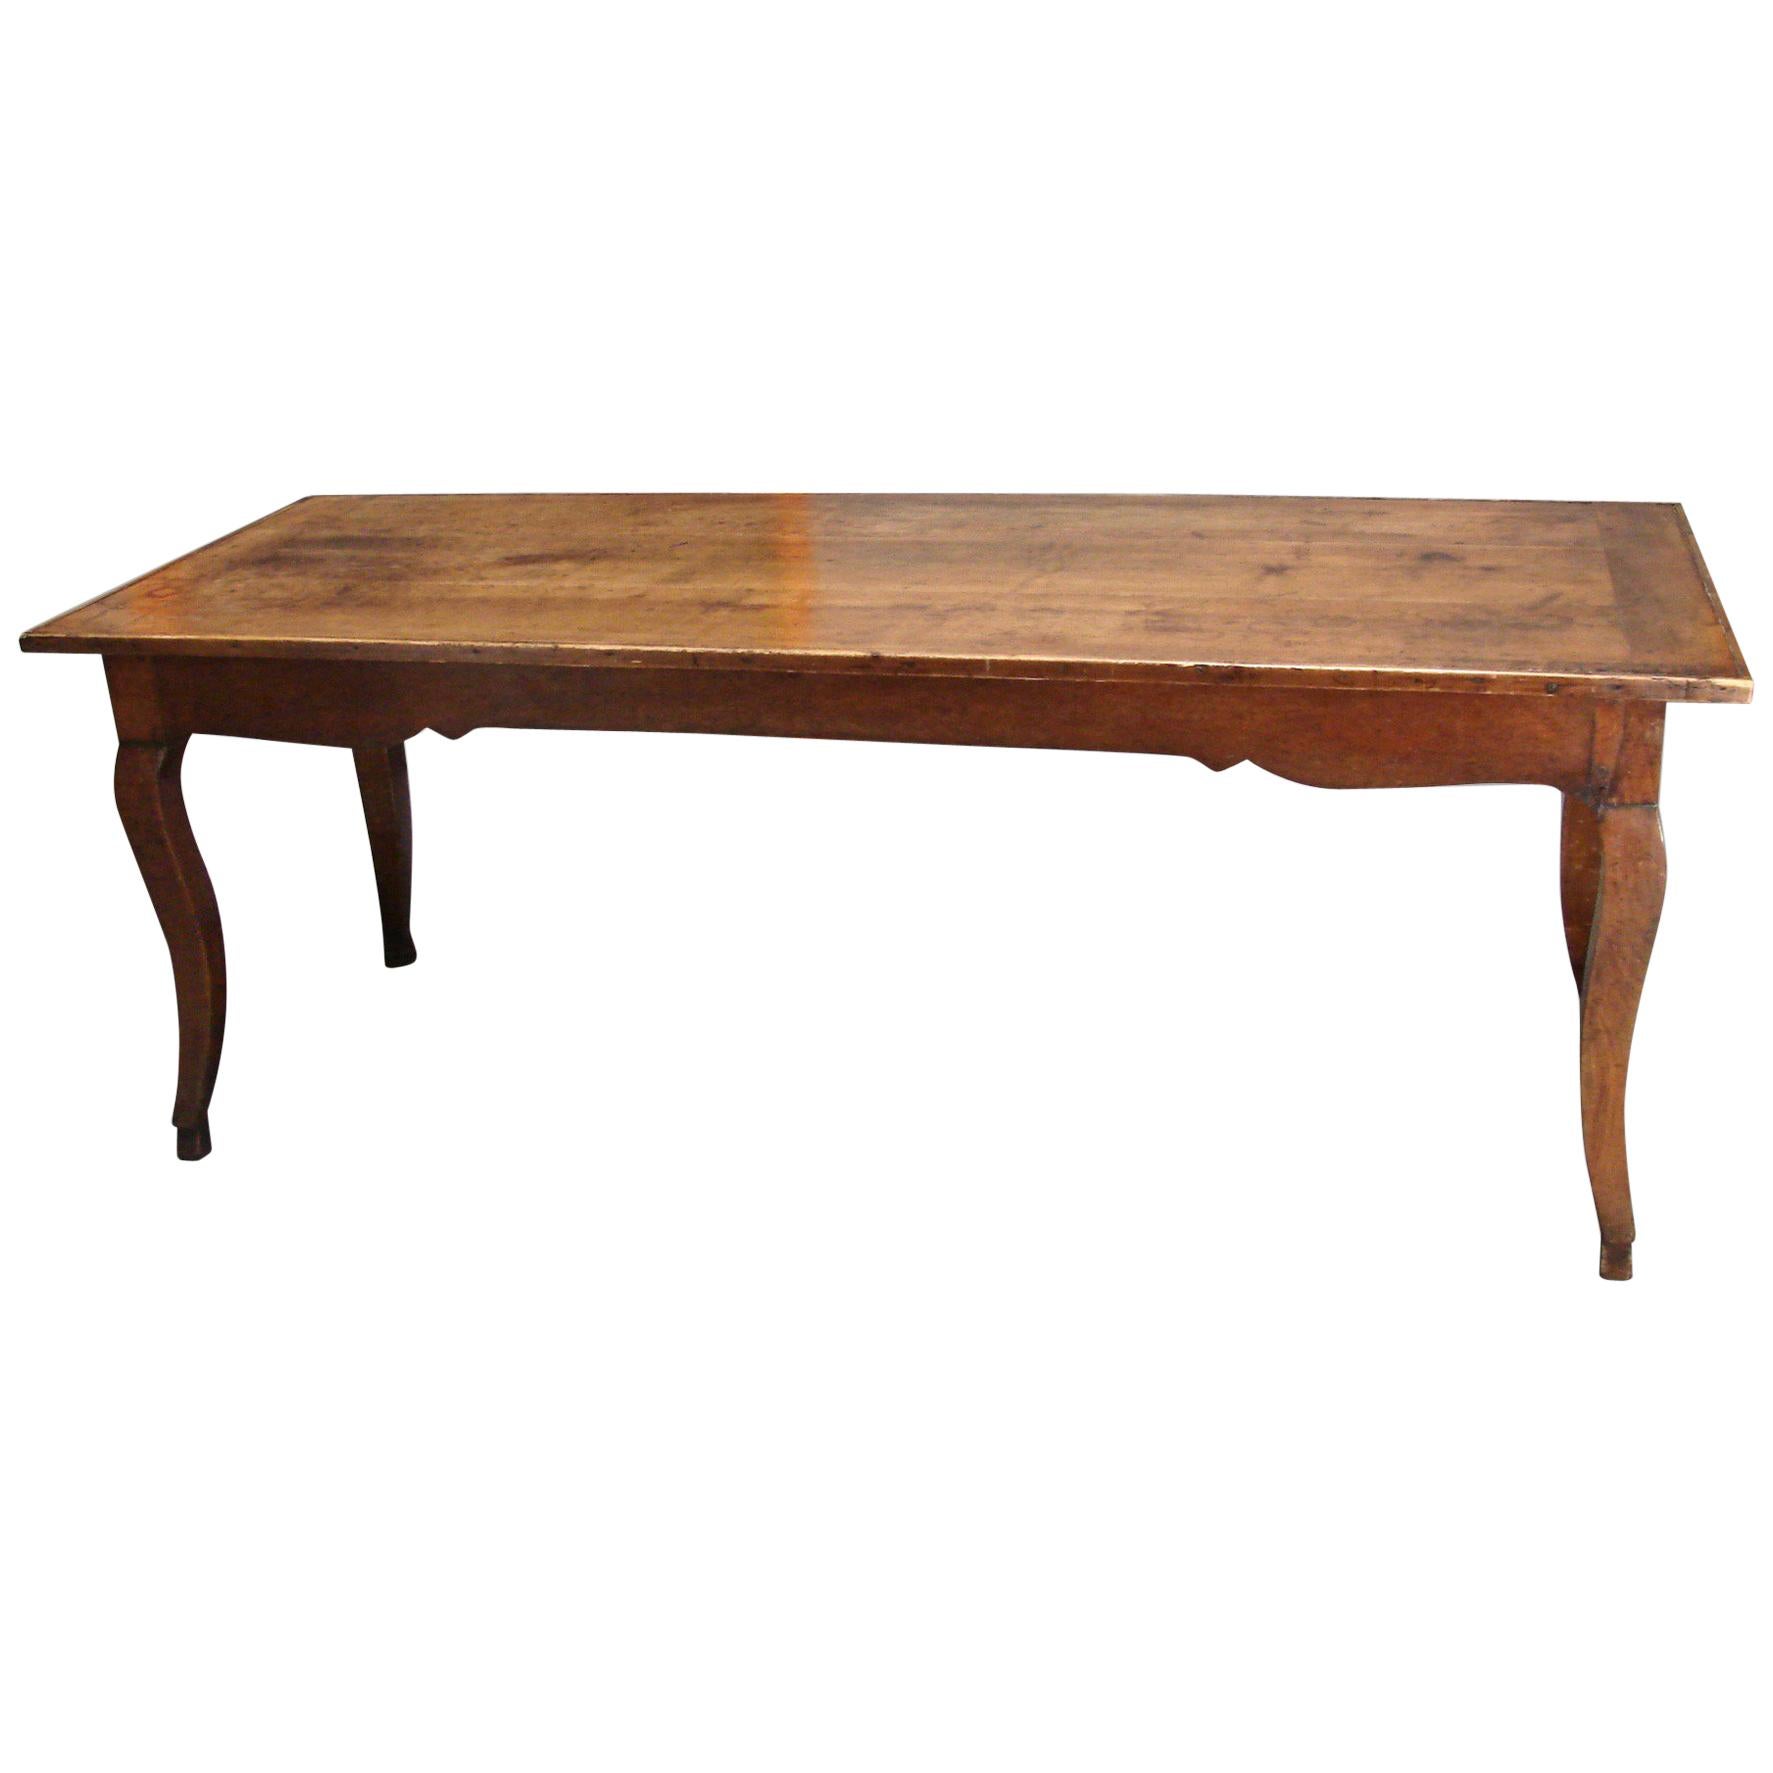 19th Century French Fruitwood Farm Table with Long Drawer